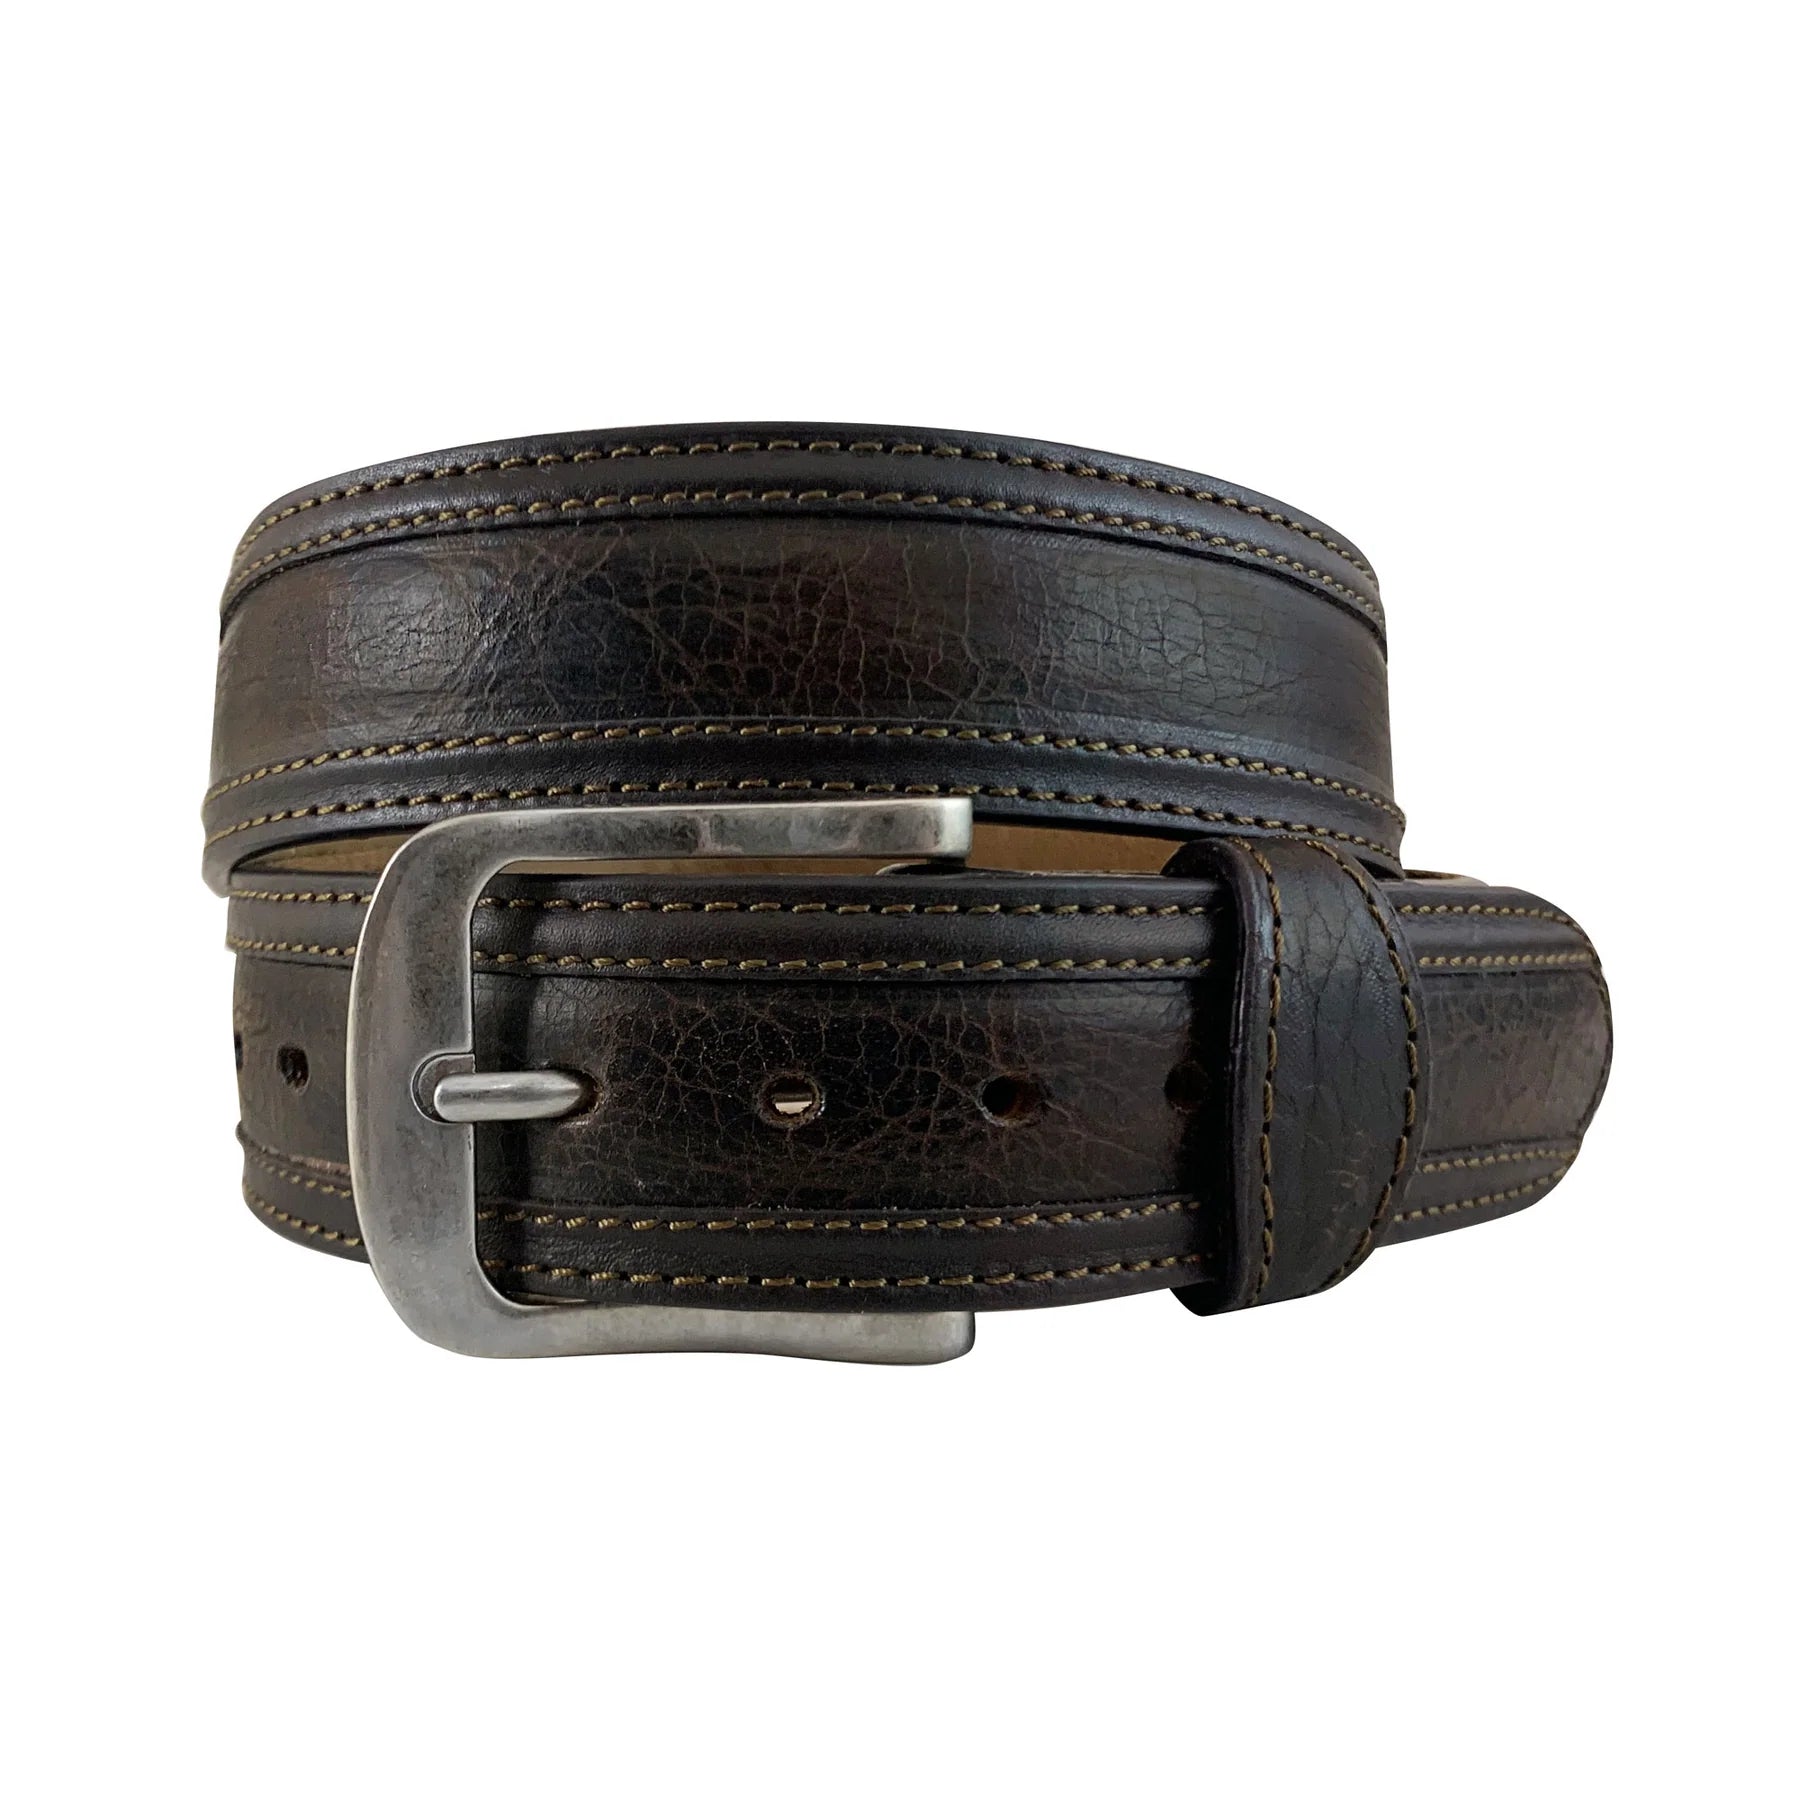 Roper Belt 1.5in Distressed American Bison Leather